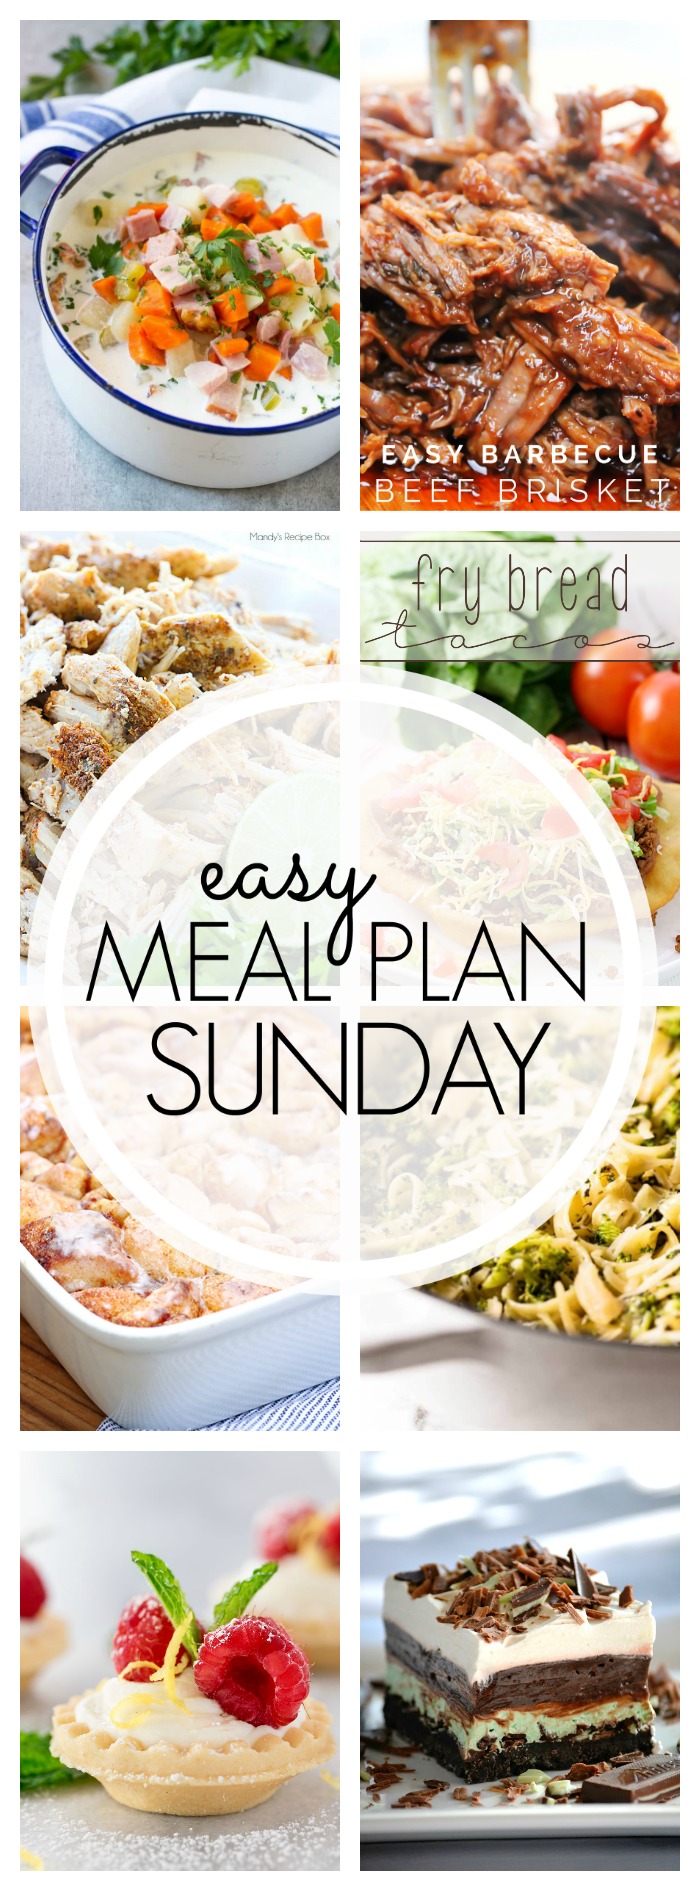 Easy Meal Plan Sunday #89